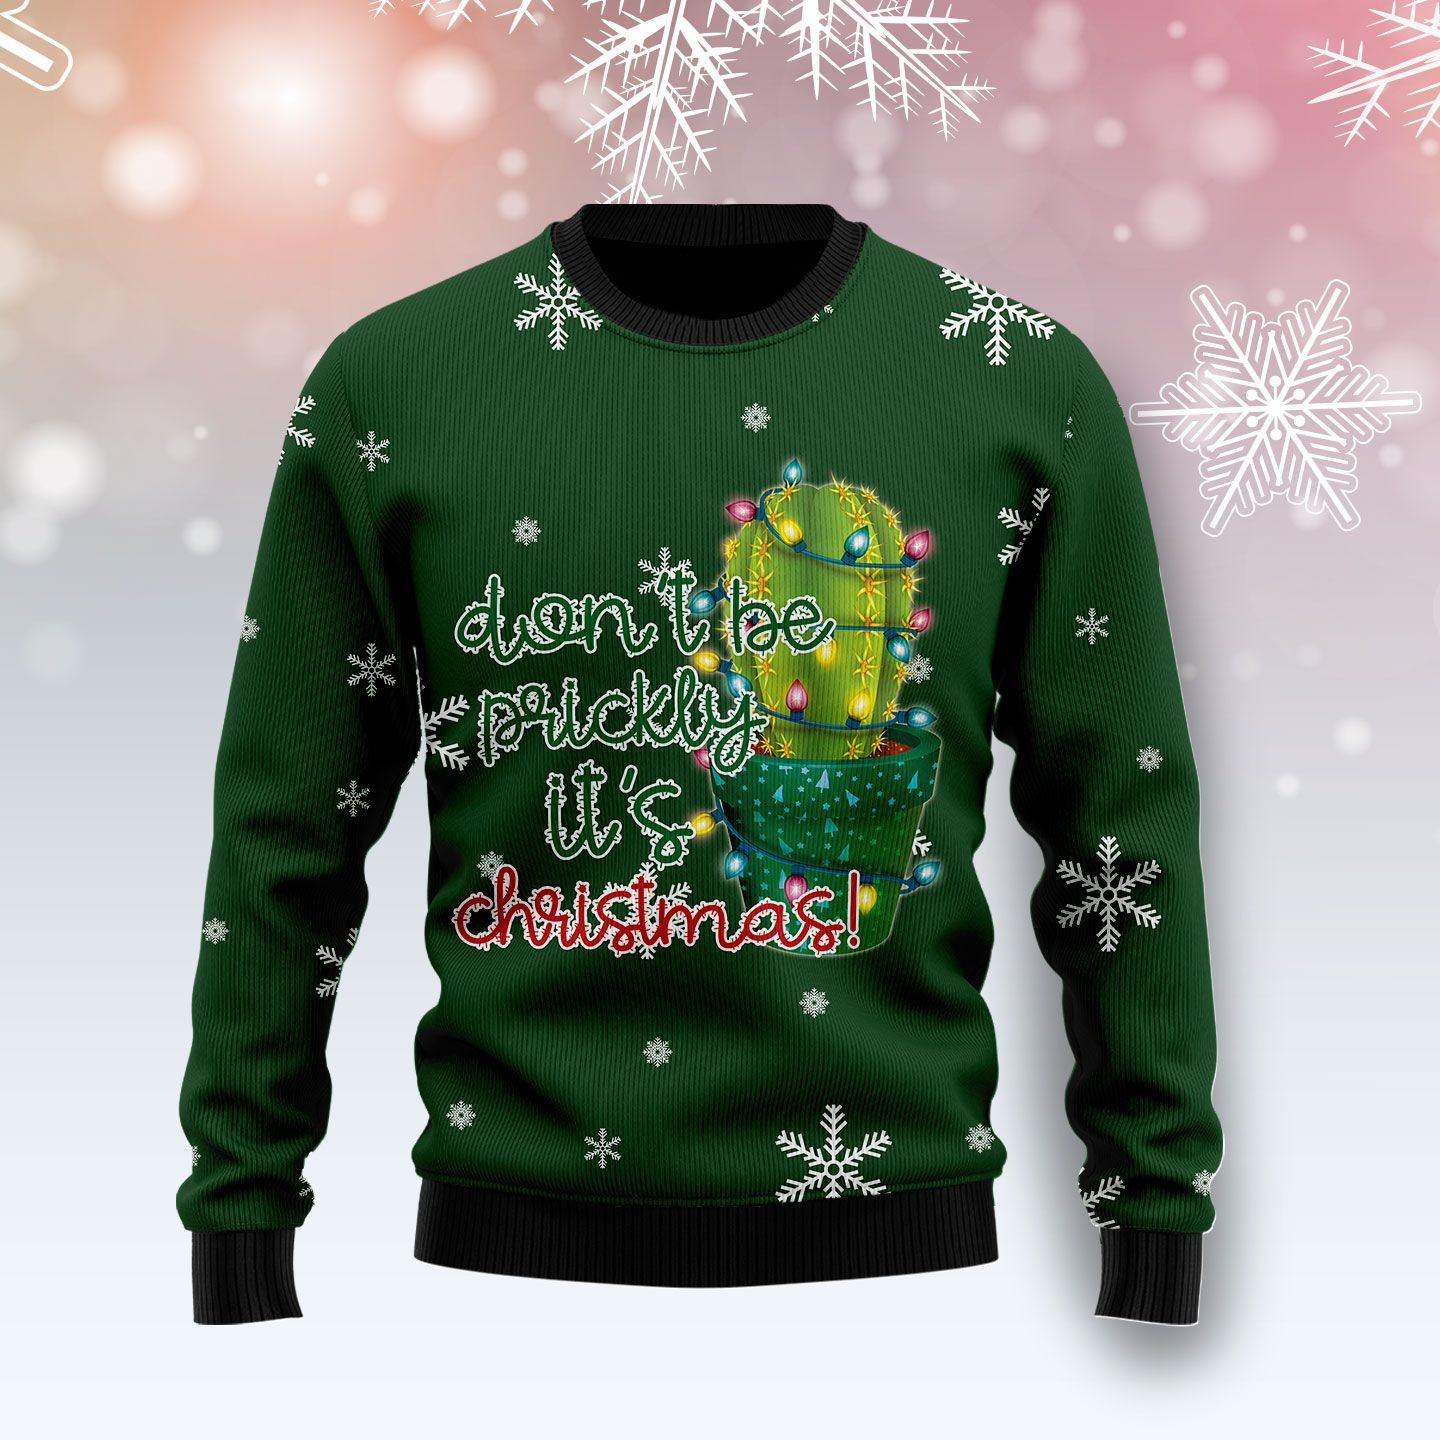 Cactus Dont Be Prickly Ugly Christmas Sweater Ugly Sweater For Men Women, Holiday Sweater